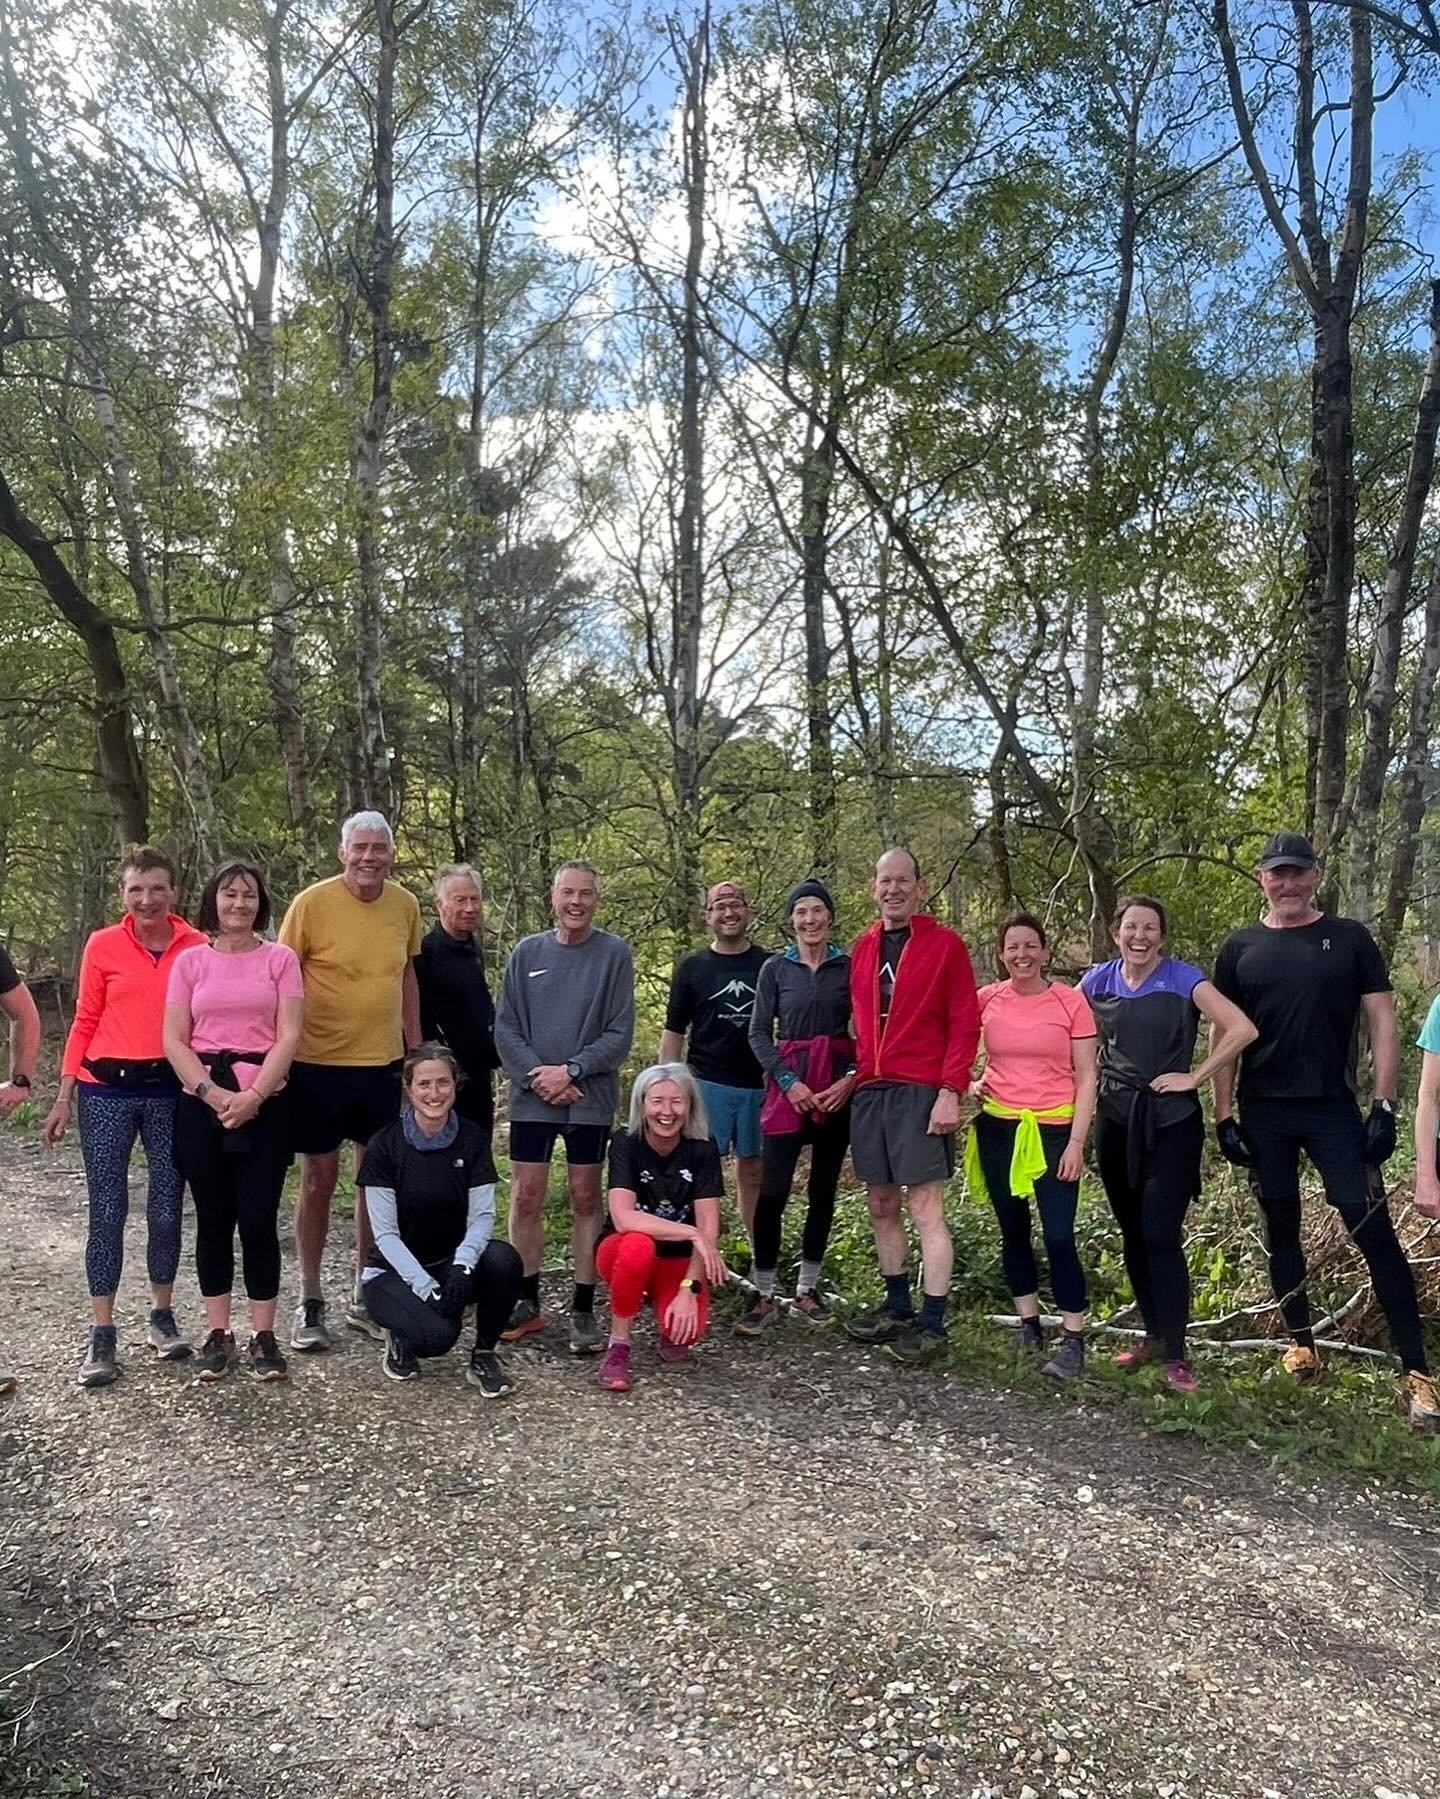 Sunny Sunday Run in the blue bells. Great turnout by the Juniors and Sarah our dedicated Juniors coach. Wishing Laura and Kathryn all the best with @londonmarathon @midhurst.milers #midhurst #cocking10k #trail #trailrunning